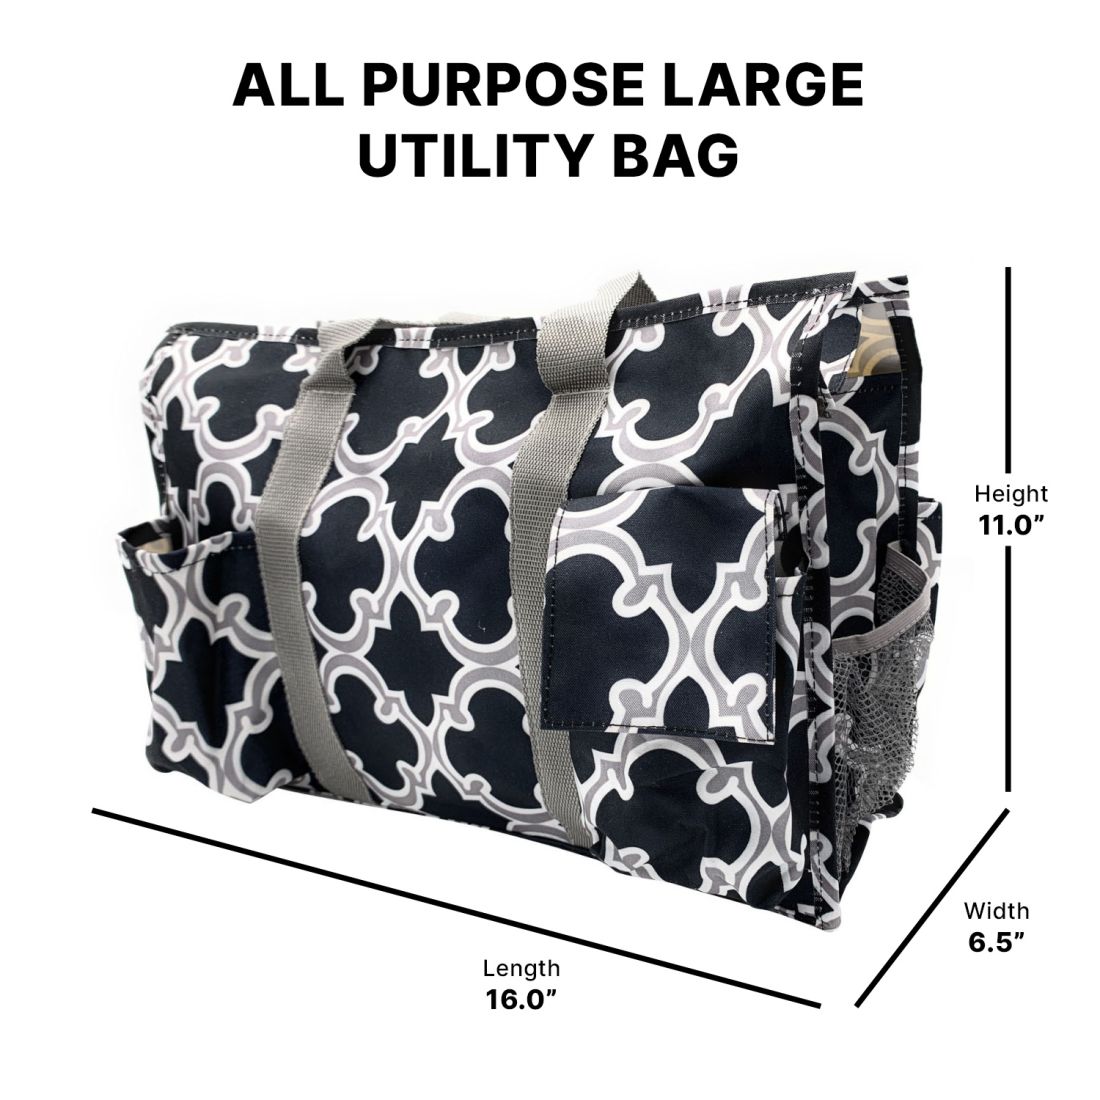 Empire Cove Utility Large Tote Bag All Purpose Shoulder Bag Shopping Travel